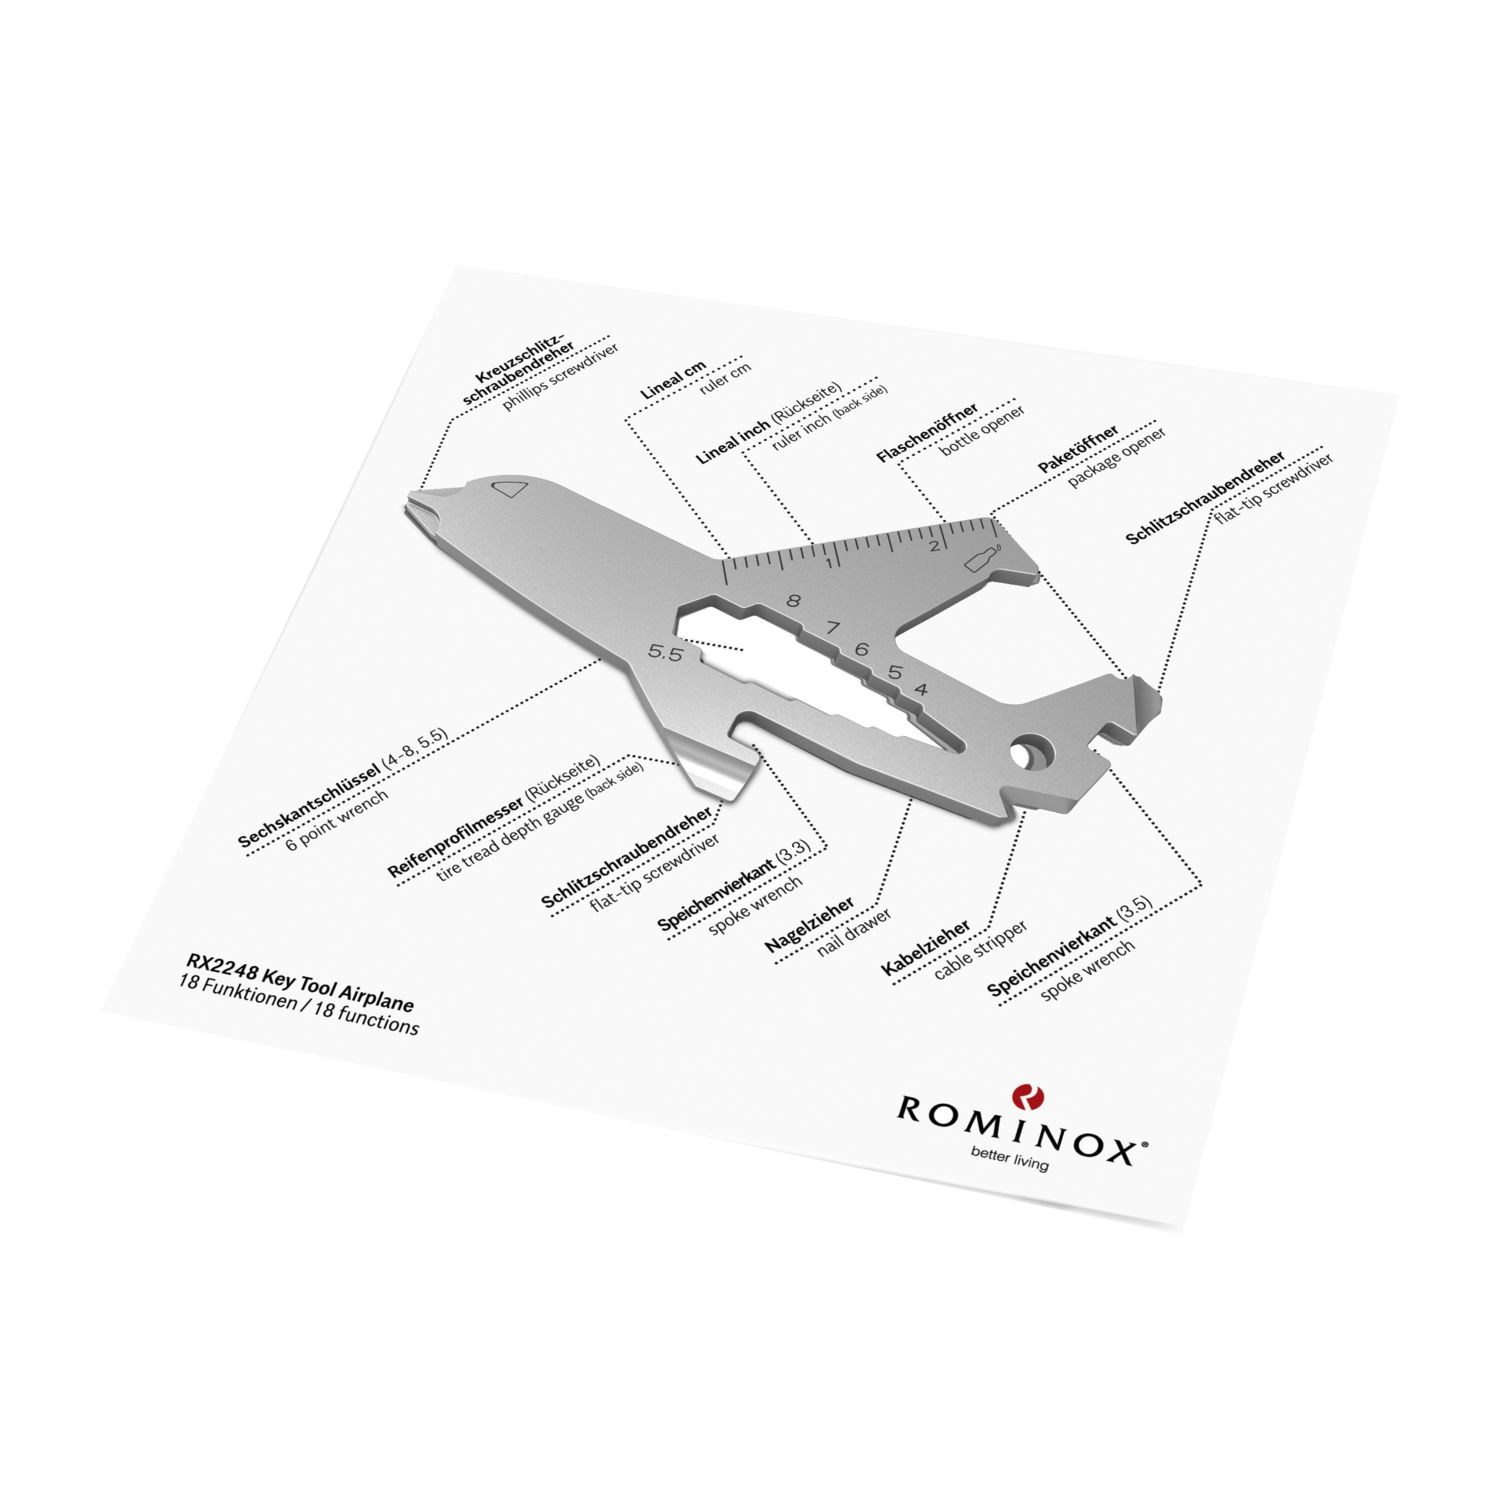 ROMINOX® Key Tool Airplane (18 Funktionen) Frohe Ostern 2K2110g